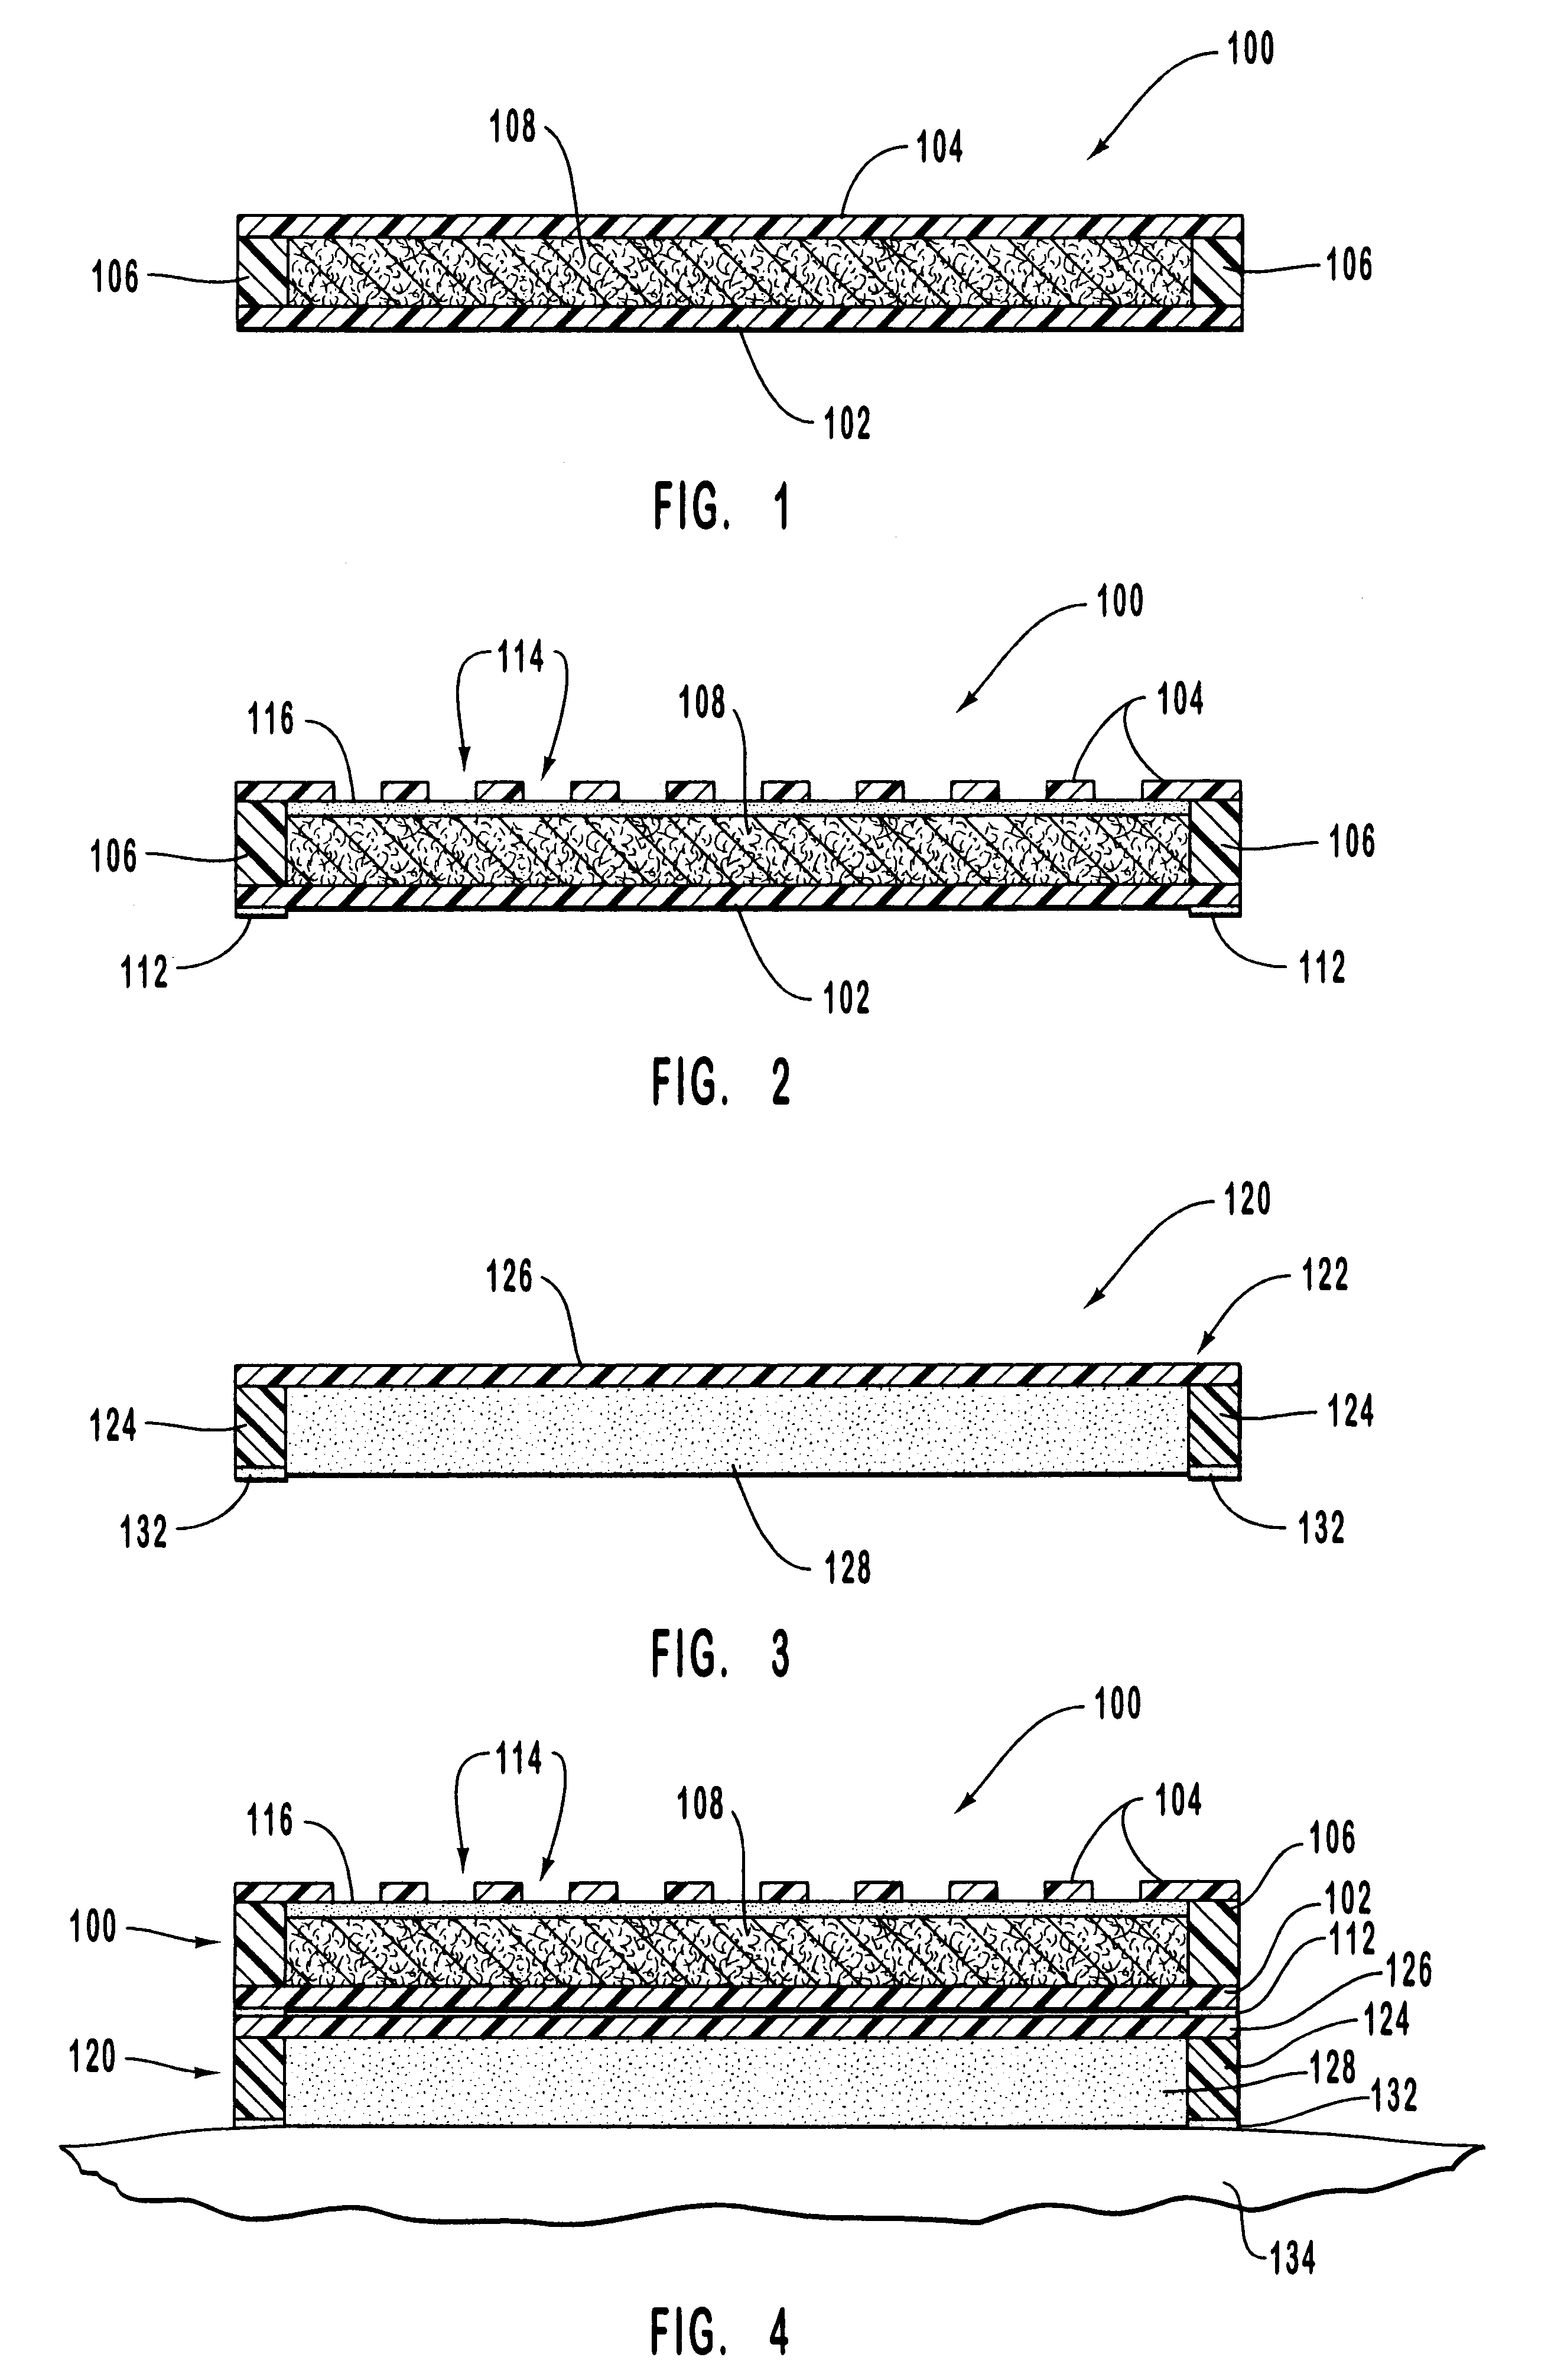 Apparatus for heating to a desired temperature for improved administration of pharmaceutically active compounds